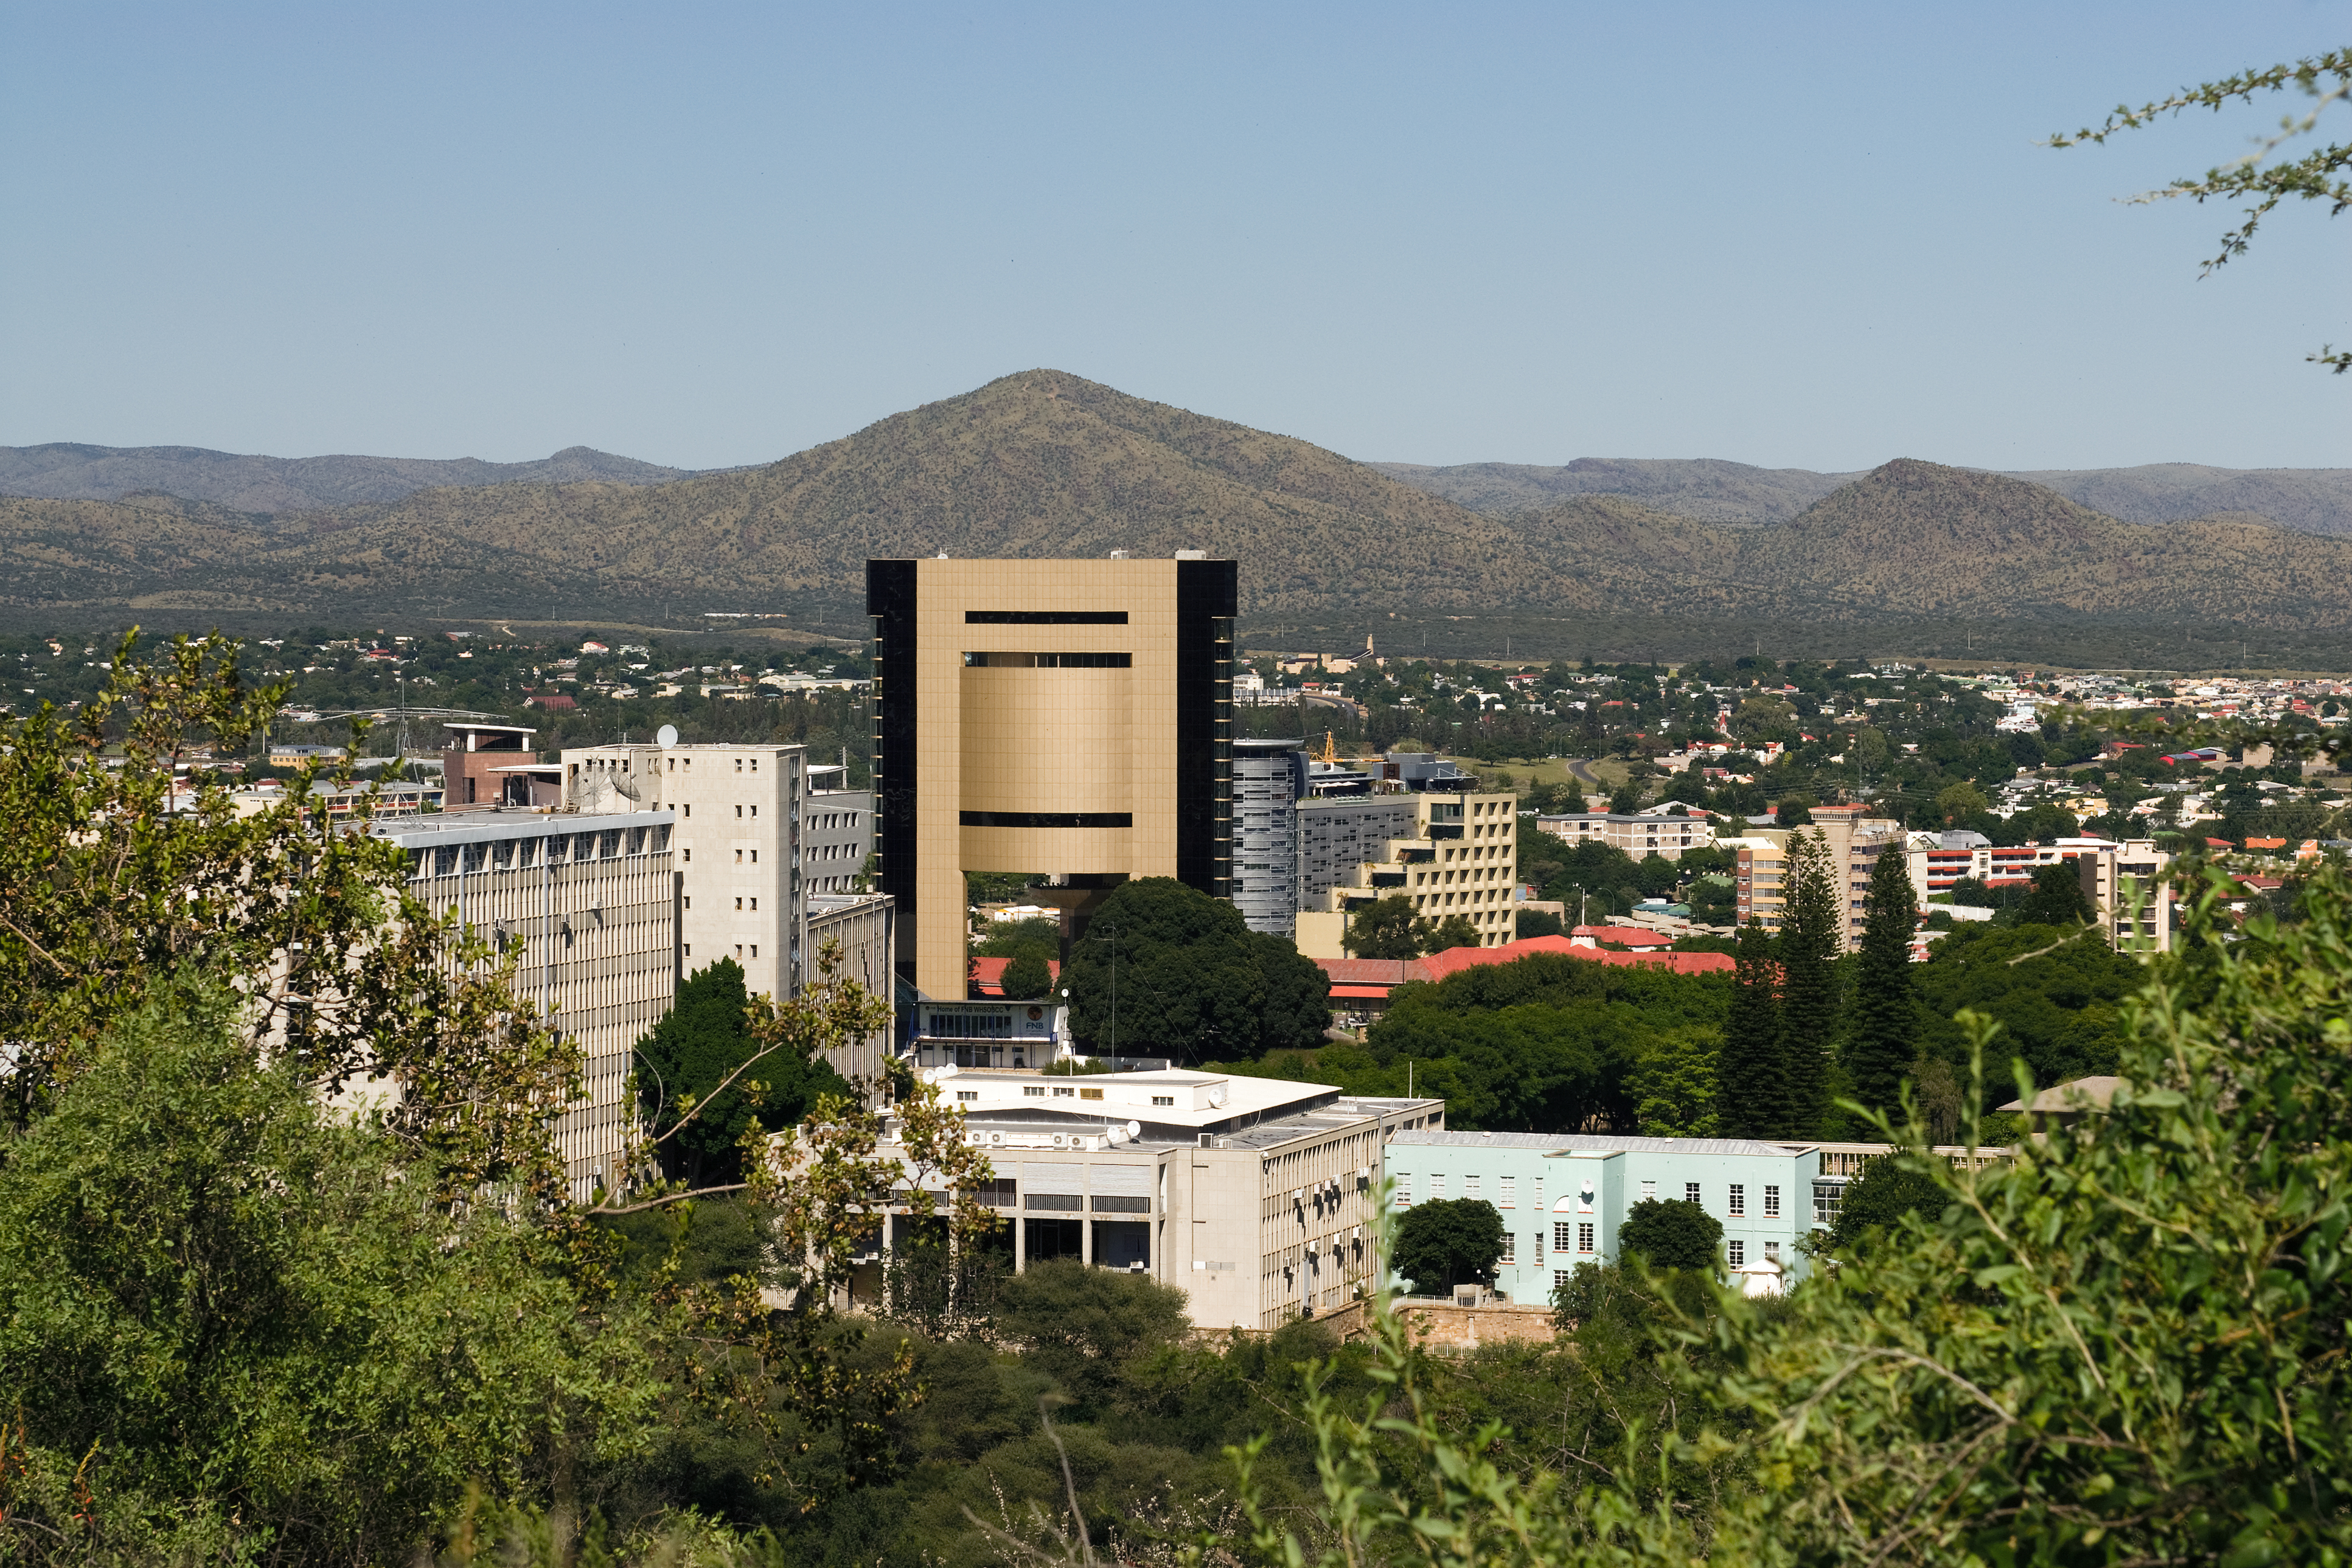 Windhoek, Namibia (photo credit: World Bank Photo Collection/flickr)